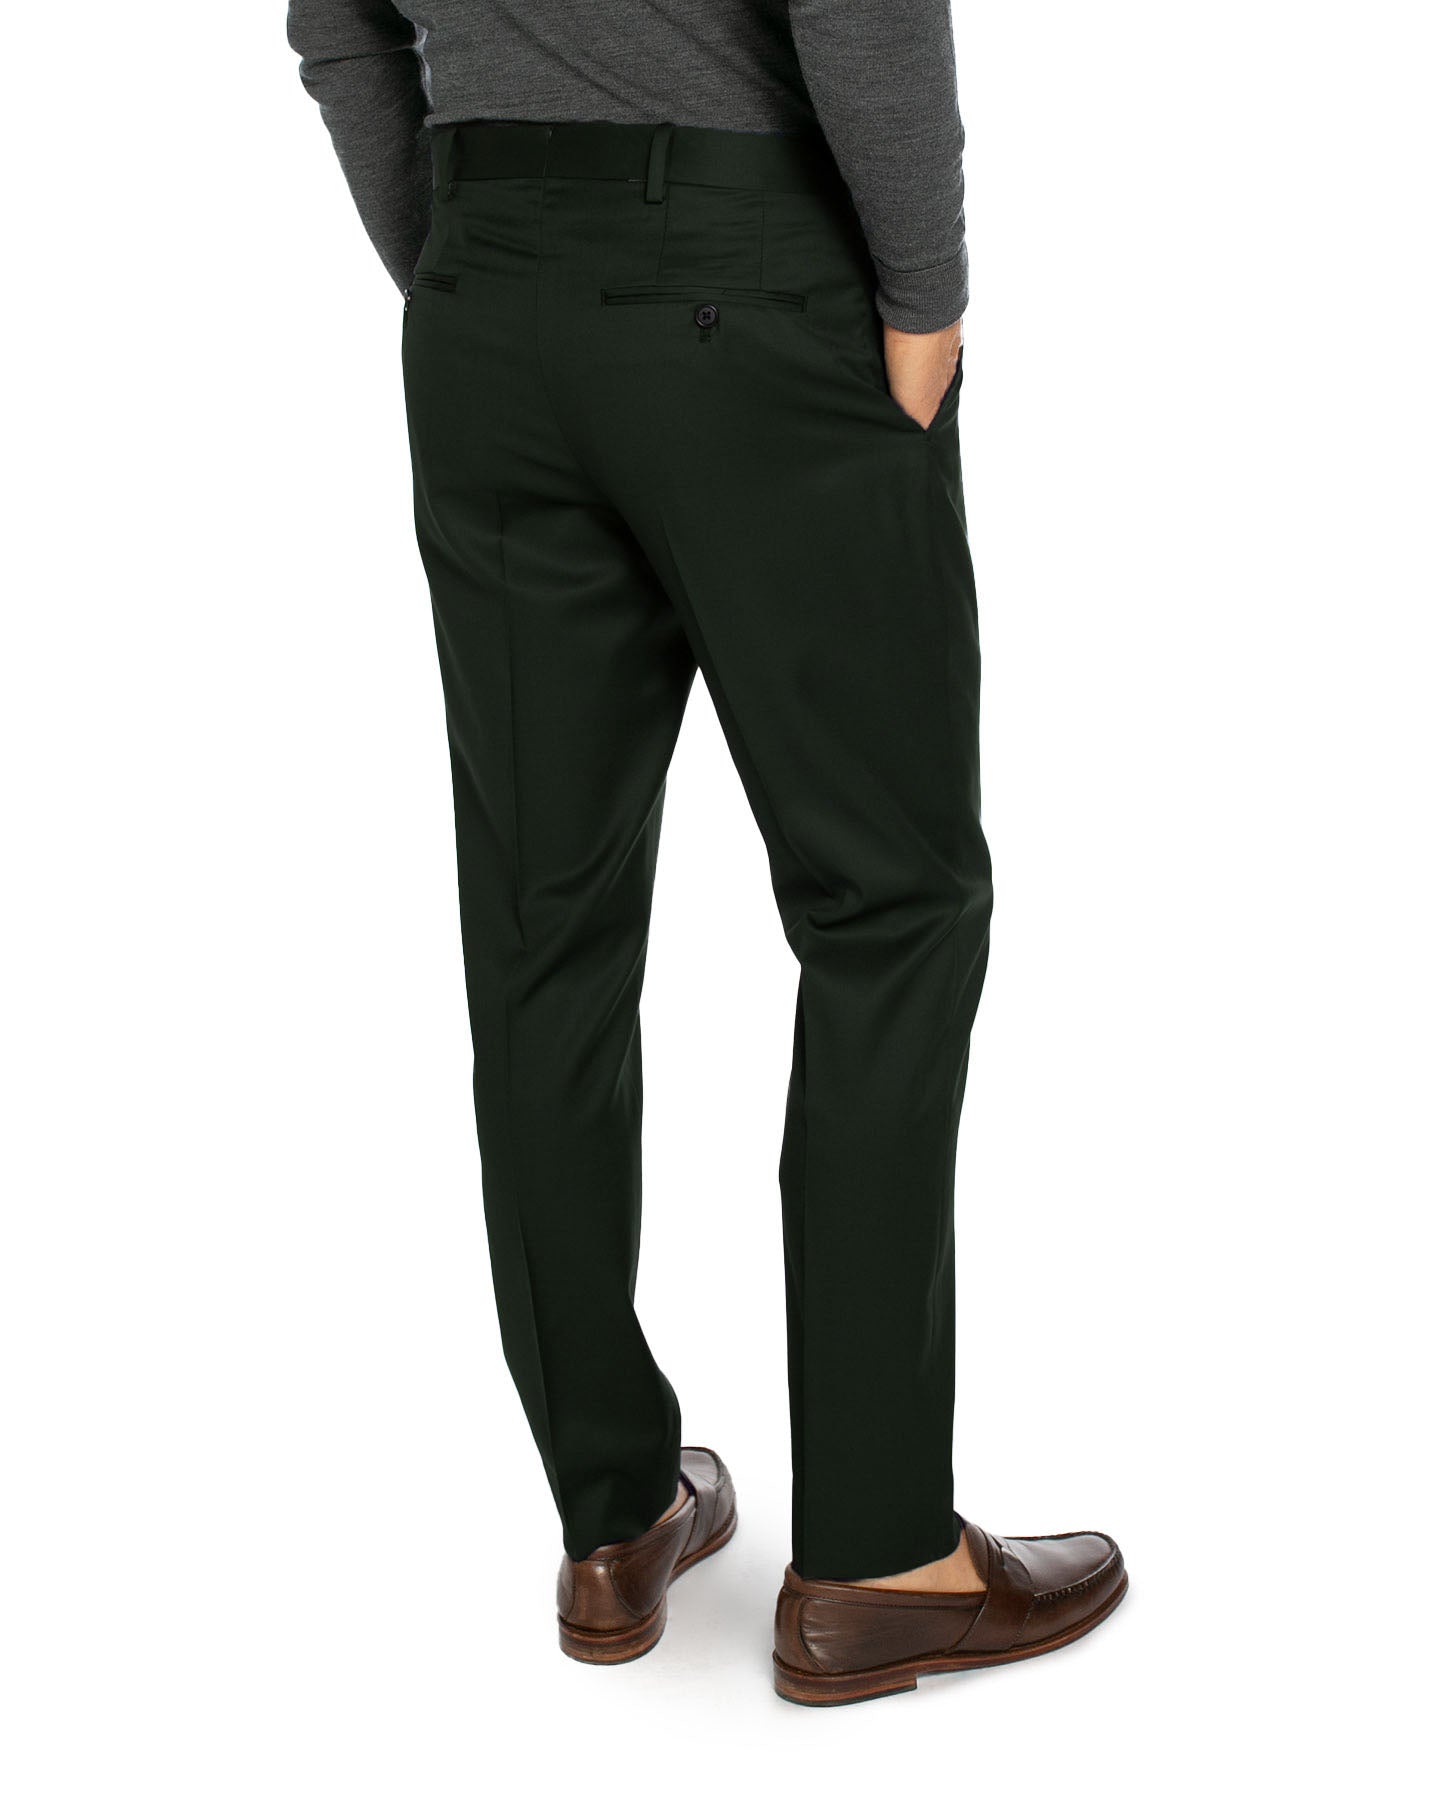 Dry Cleaning Colorfastness Resistance Against Shrinkage Men Olive Green  Slim Fit Cotton Formal Trousers at Best Price in Delhi | S & S Enterprises